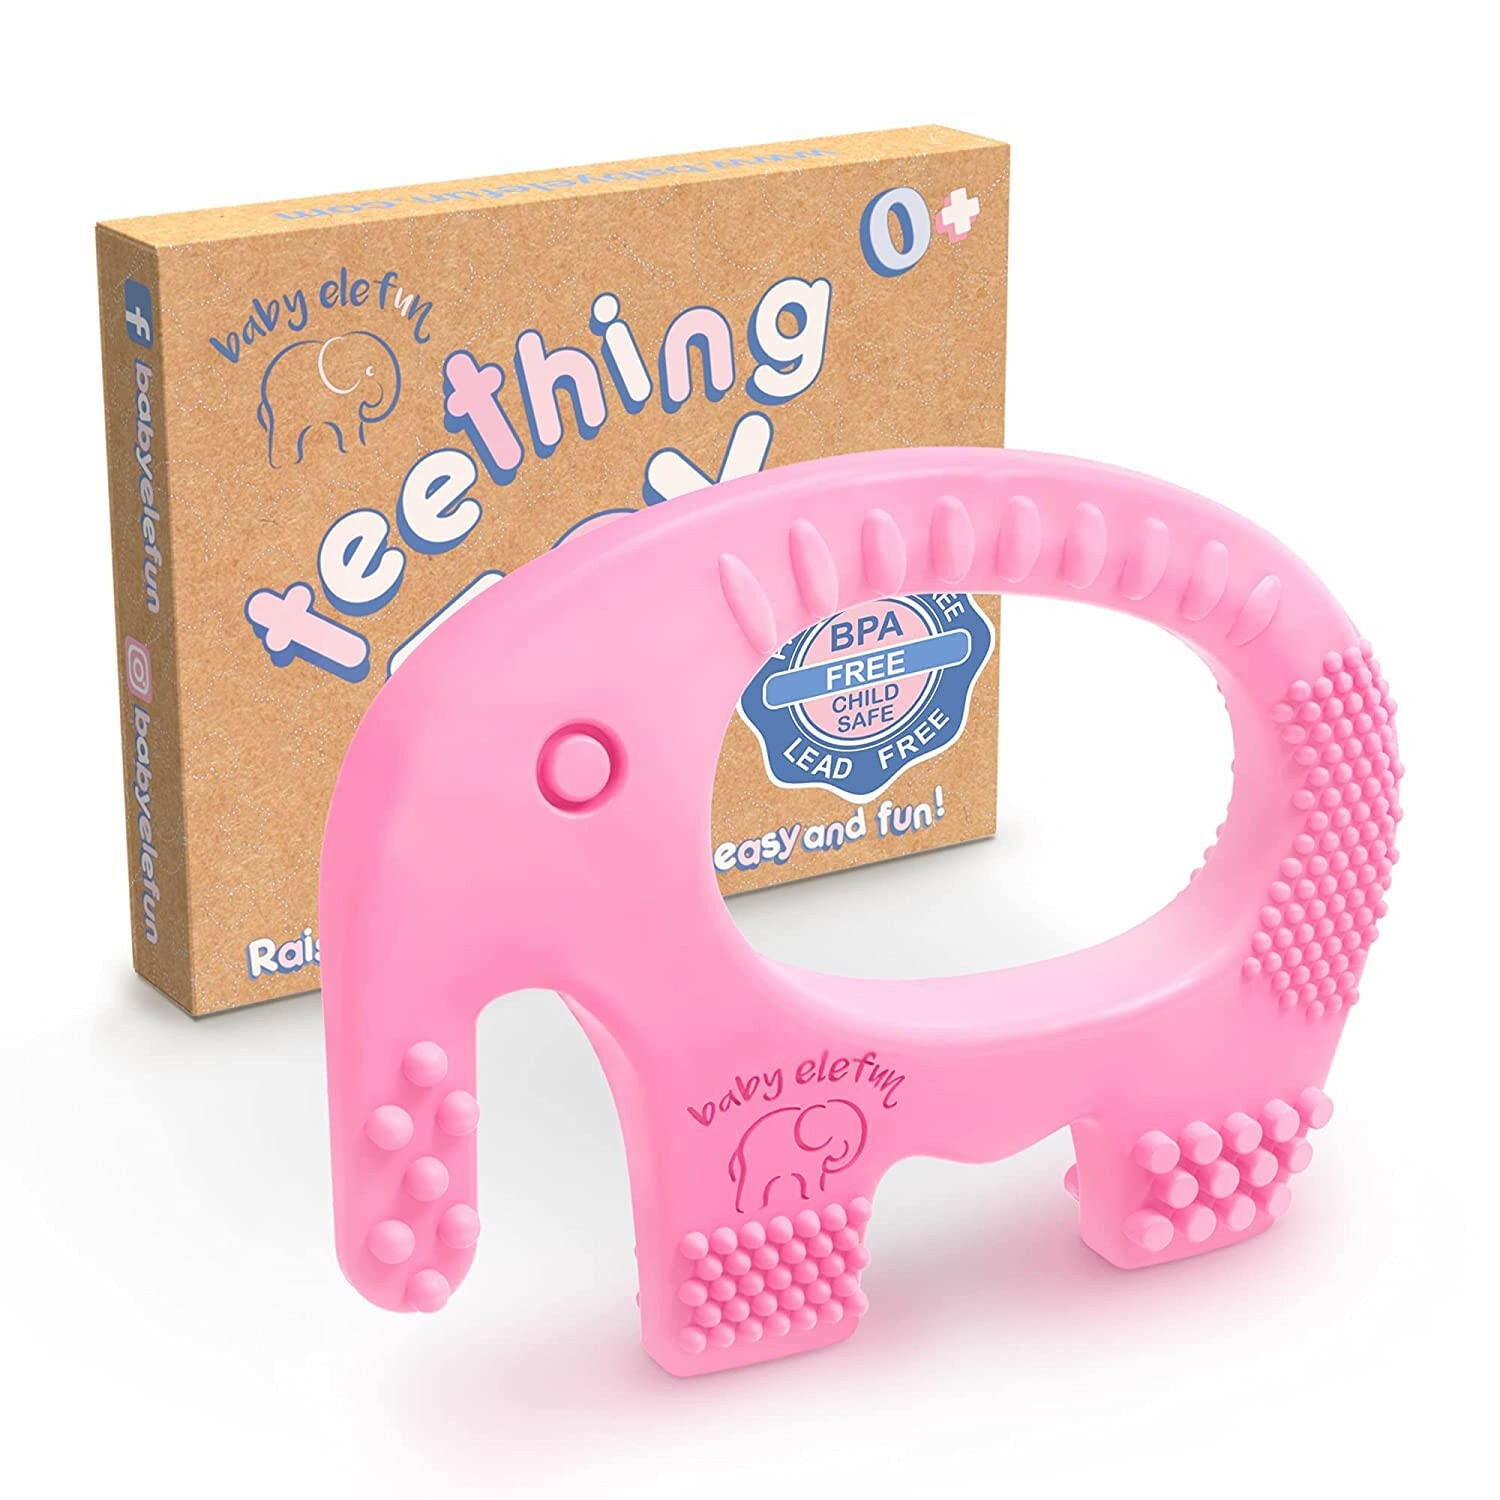 BABY ELEFUN Teething Toy Ring, Effective & Easy to Hold BPA Free Silicone Elephant Teethers with Gift Package, Teether Rings Toys Best for Babies 0-6, 6-12 Months, Infant Boys & Girls, Baby Shower.